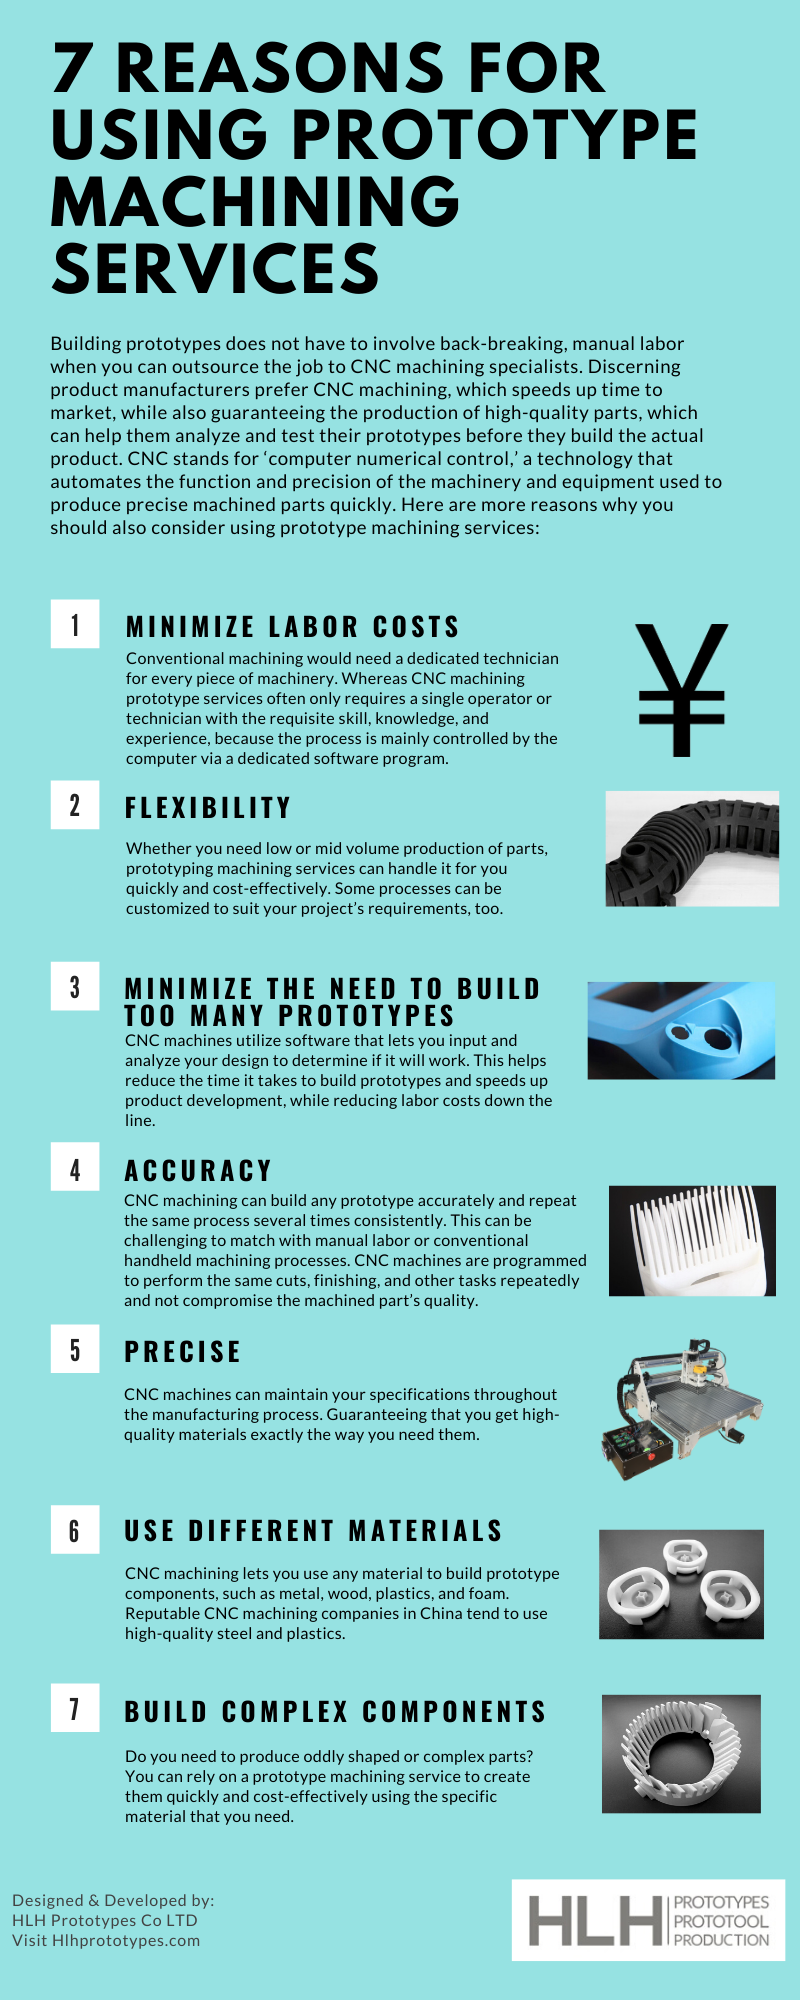 7 Reasons for Using Prototype Machining Services  by prototypeshlh